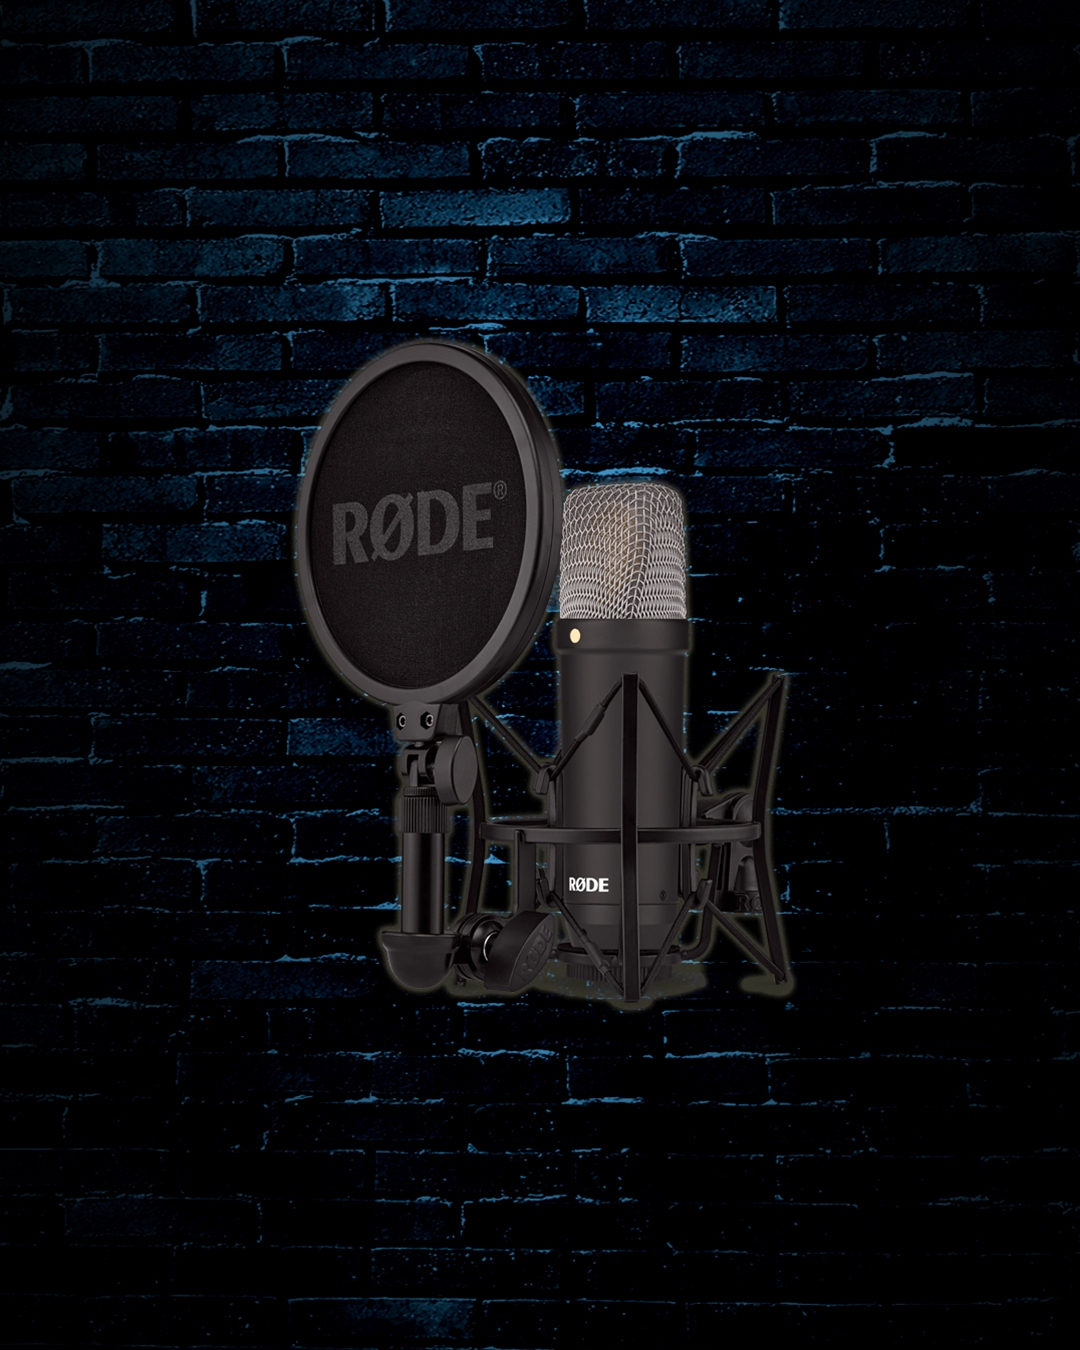 Rode NT1 Signature Series Condenser Microphone with Stand - Black